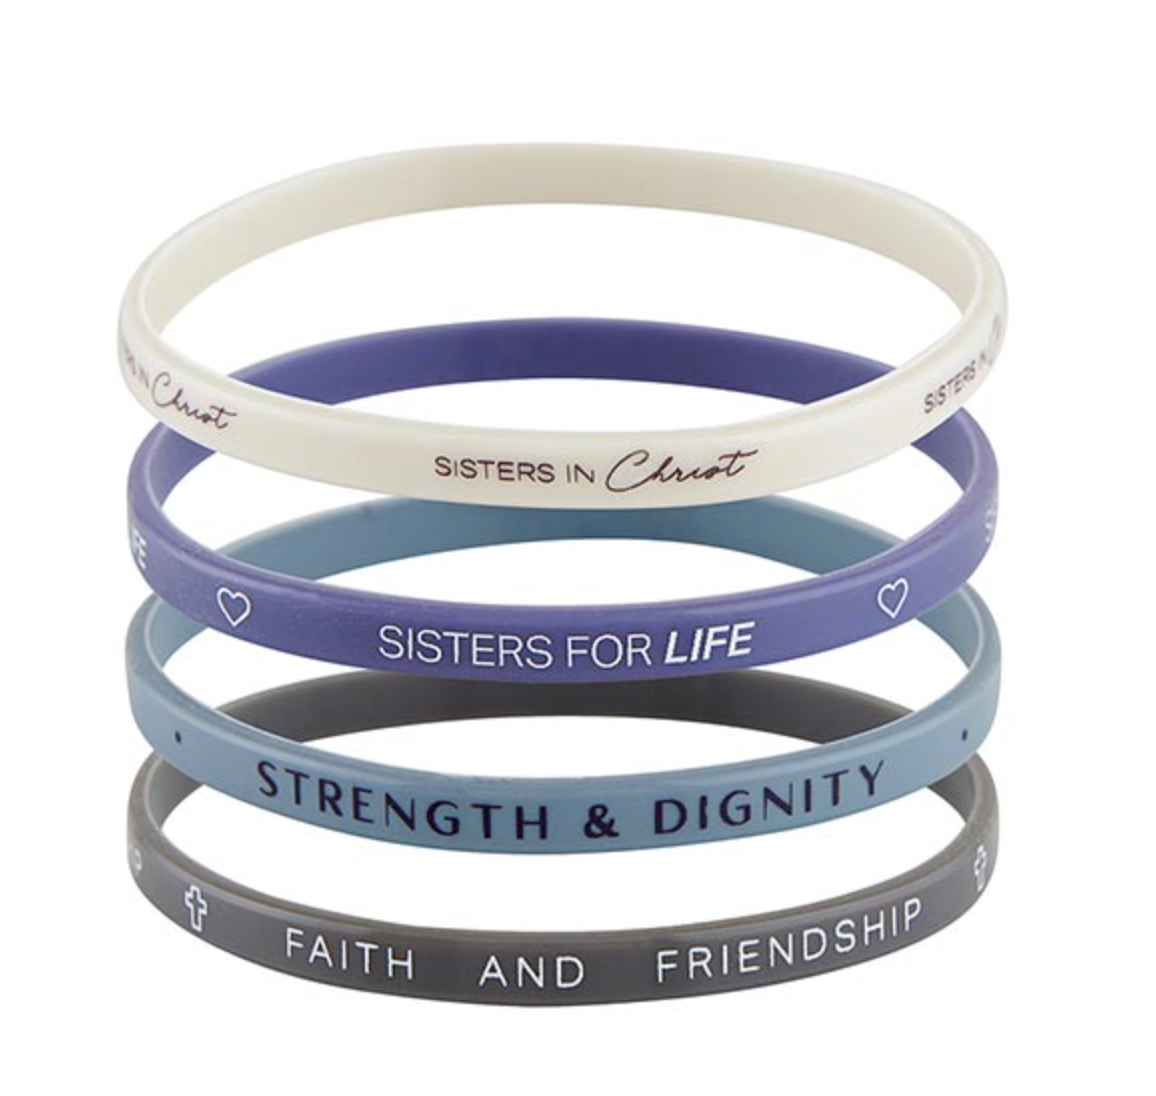 Sisters in Christ Silicone Bracelet Set front view.